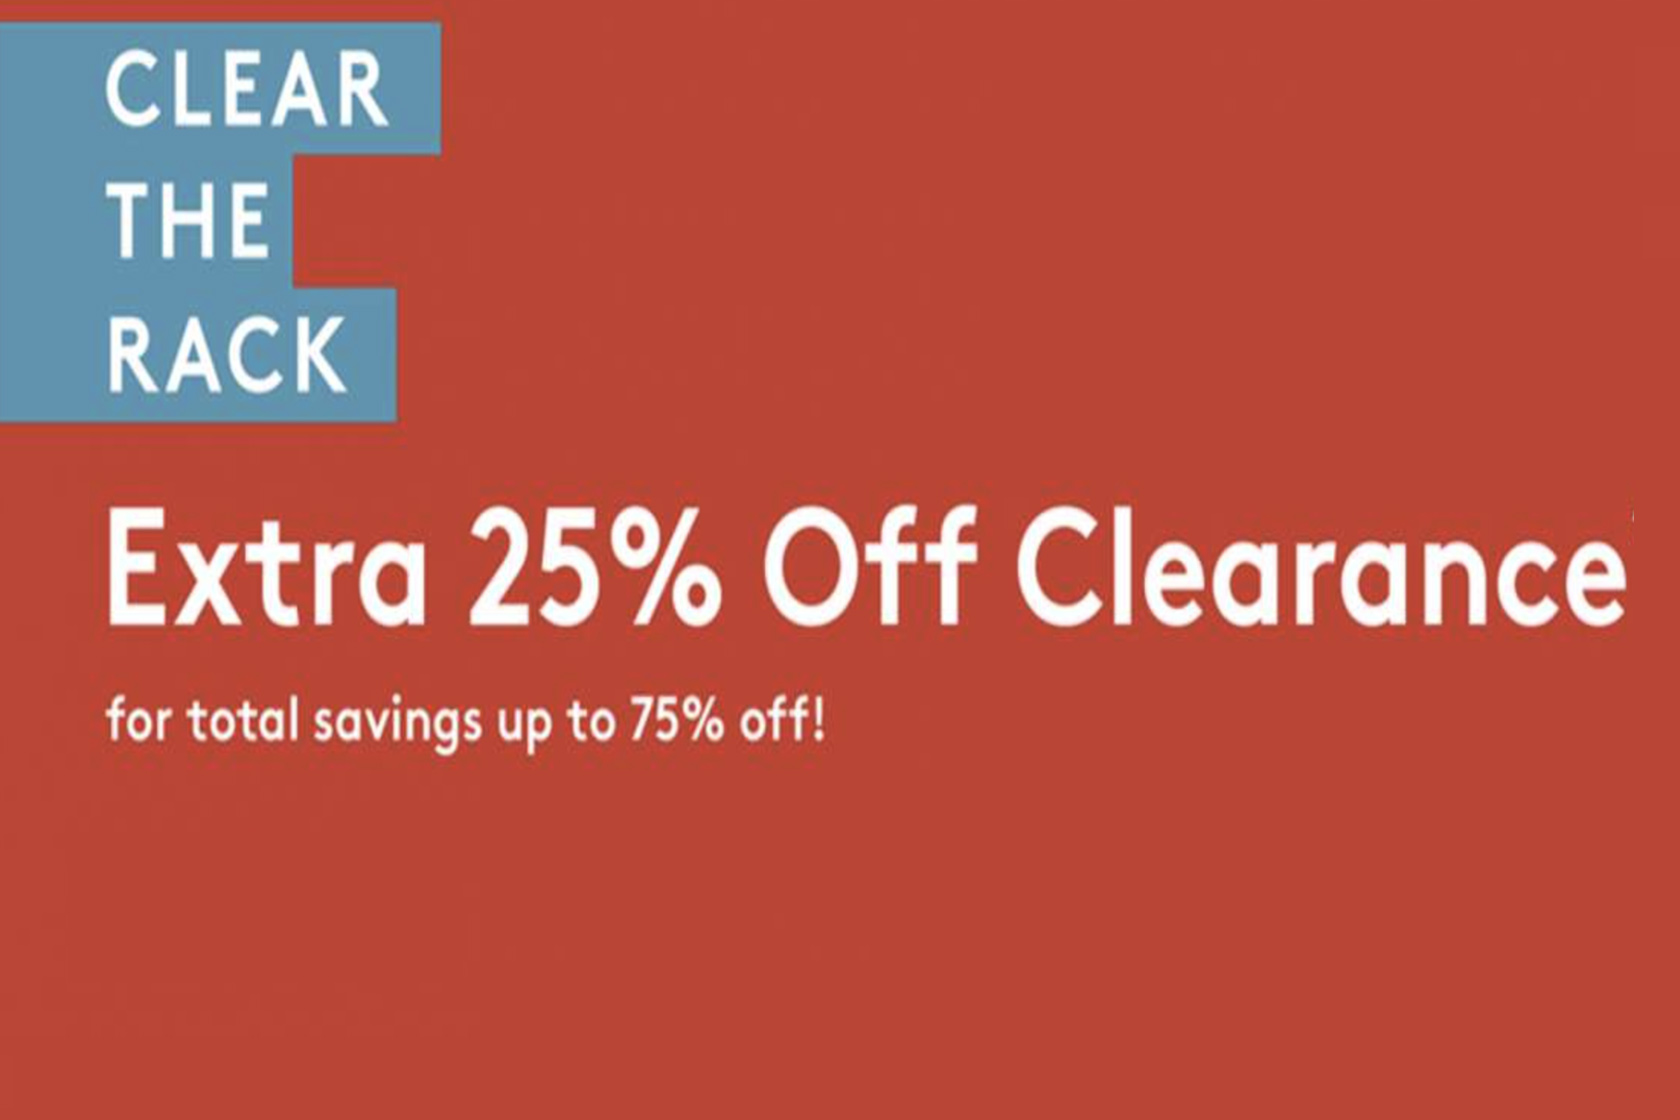 Clear the Rack is back at Nordstrom Rack for Memorial Day